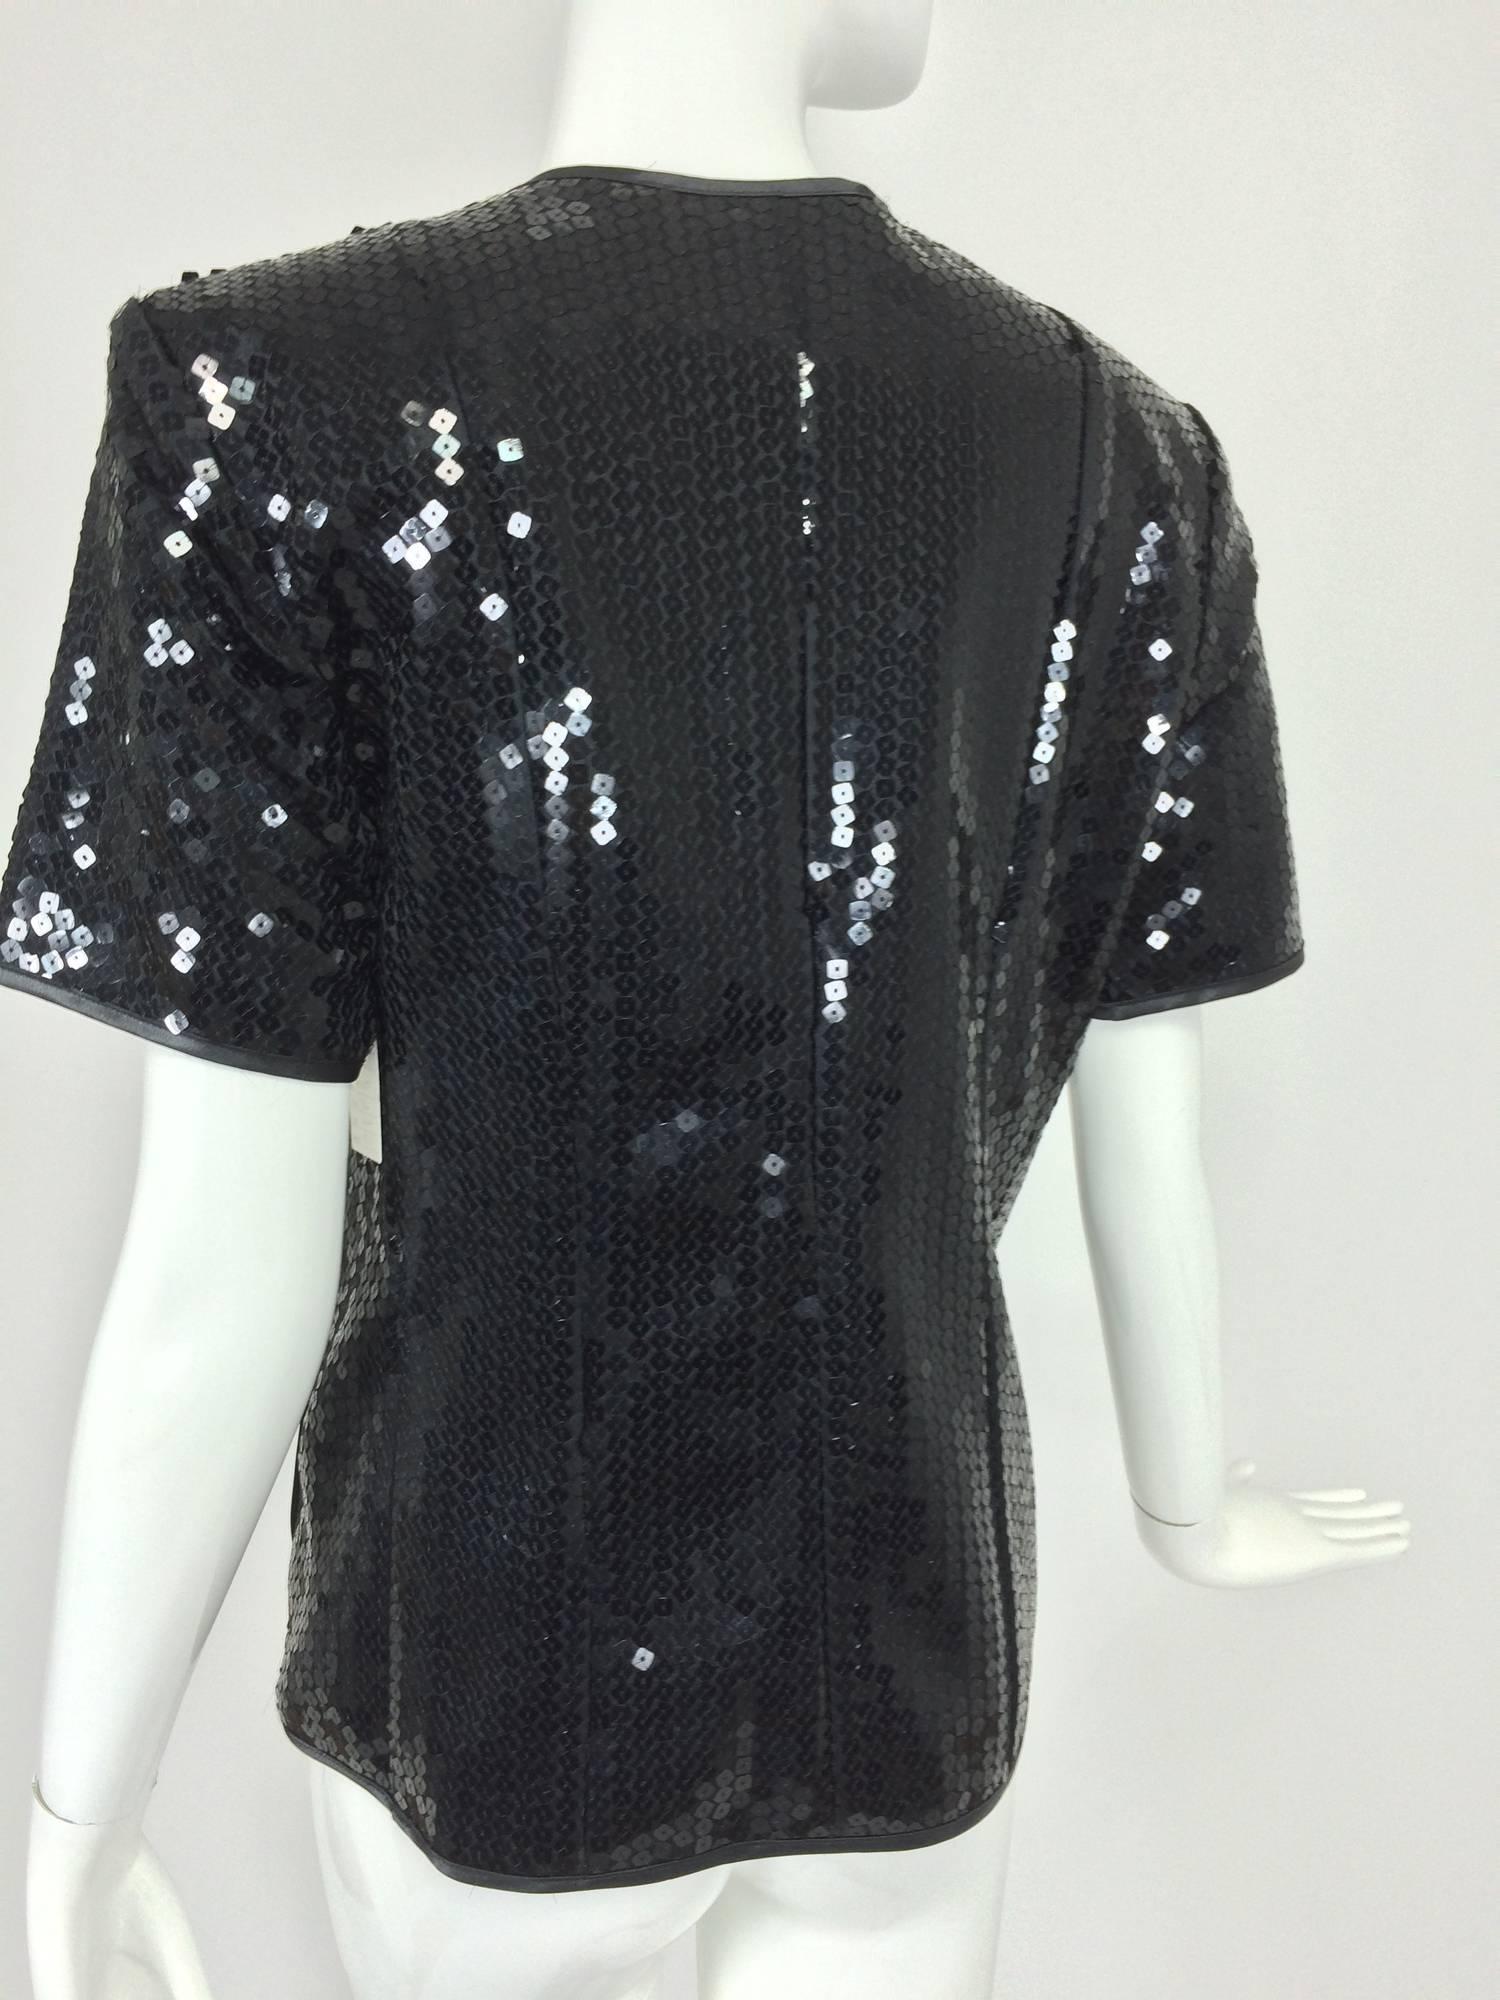 Yves St Laurent black sequin short sleeve evening jacket 1980s...The Variation label is from the 1980s...This jacket has a lot of style...Single breasted with three button closure at the front, facings are trimmed in black satin...The jacket is